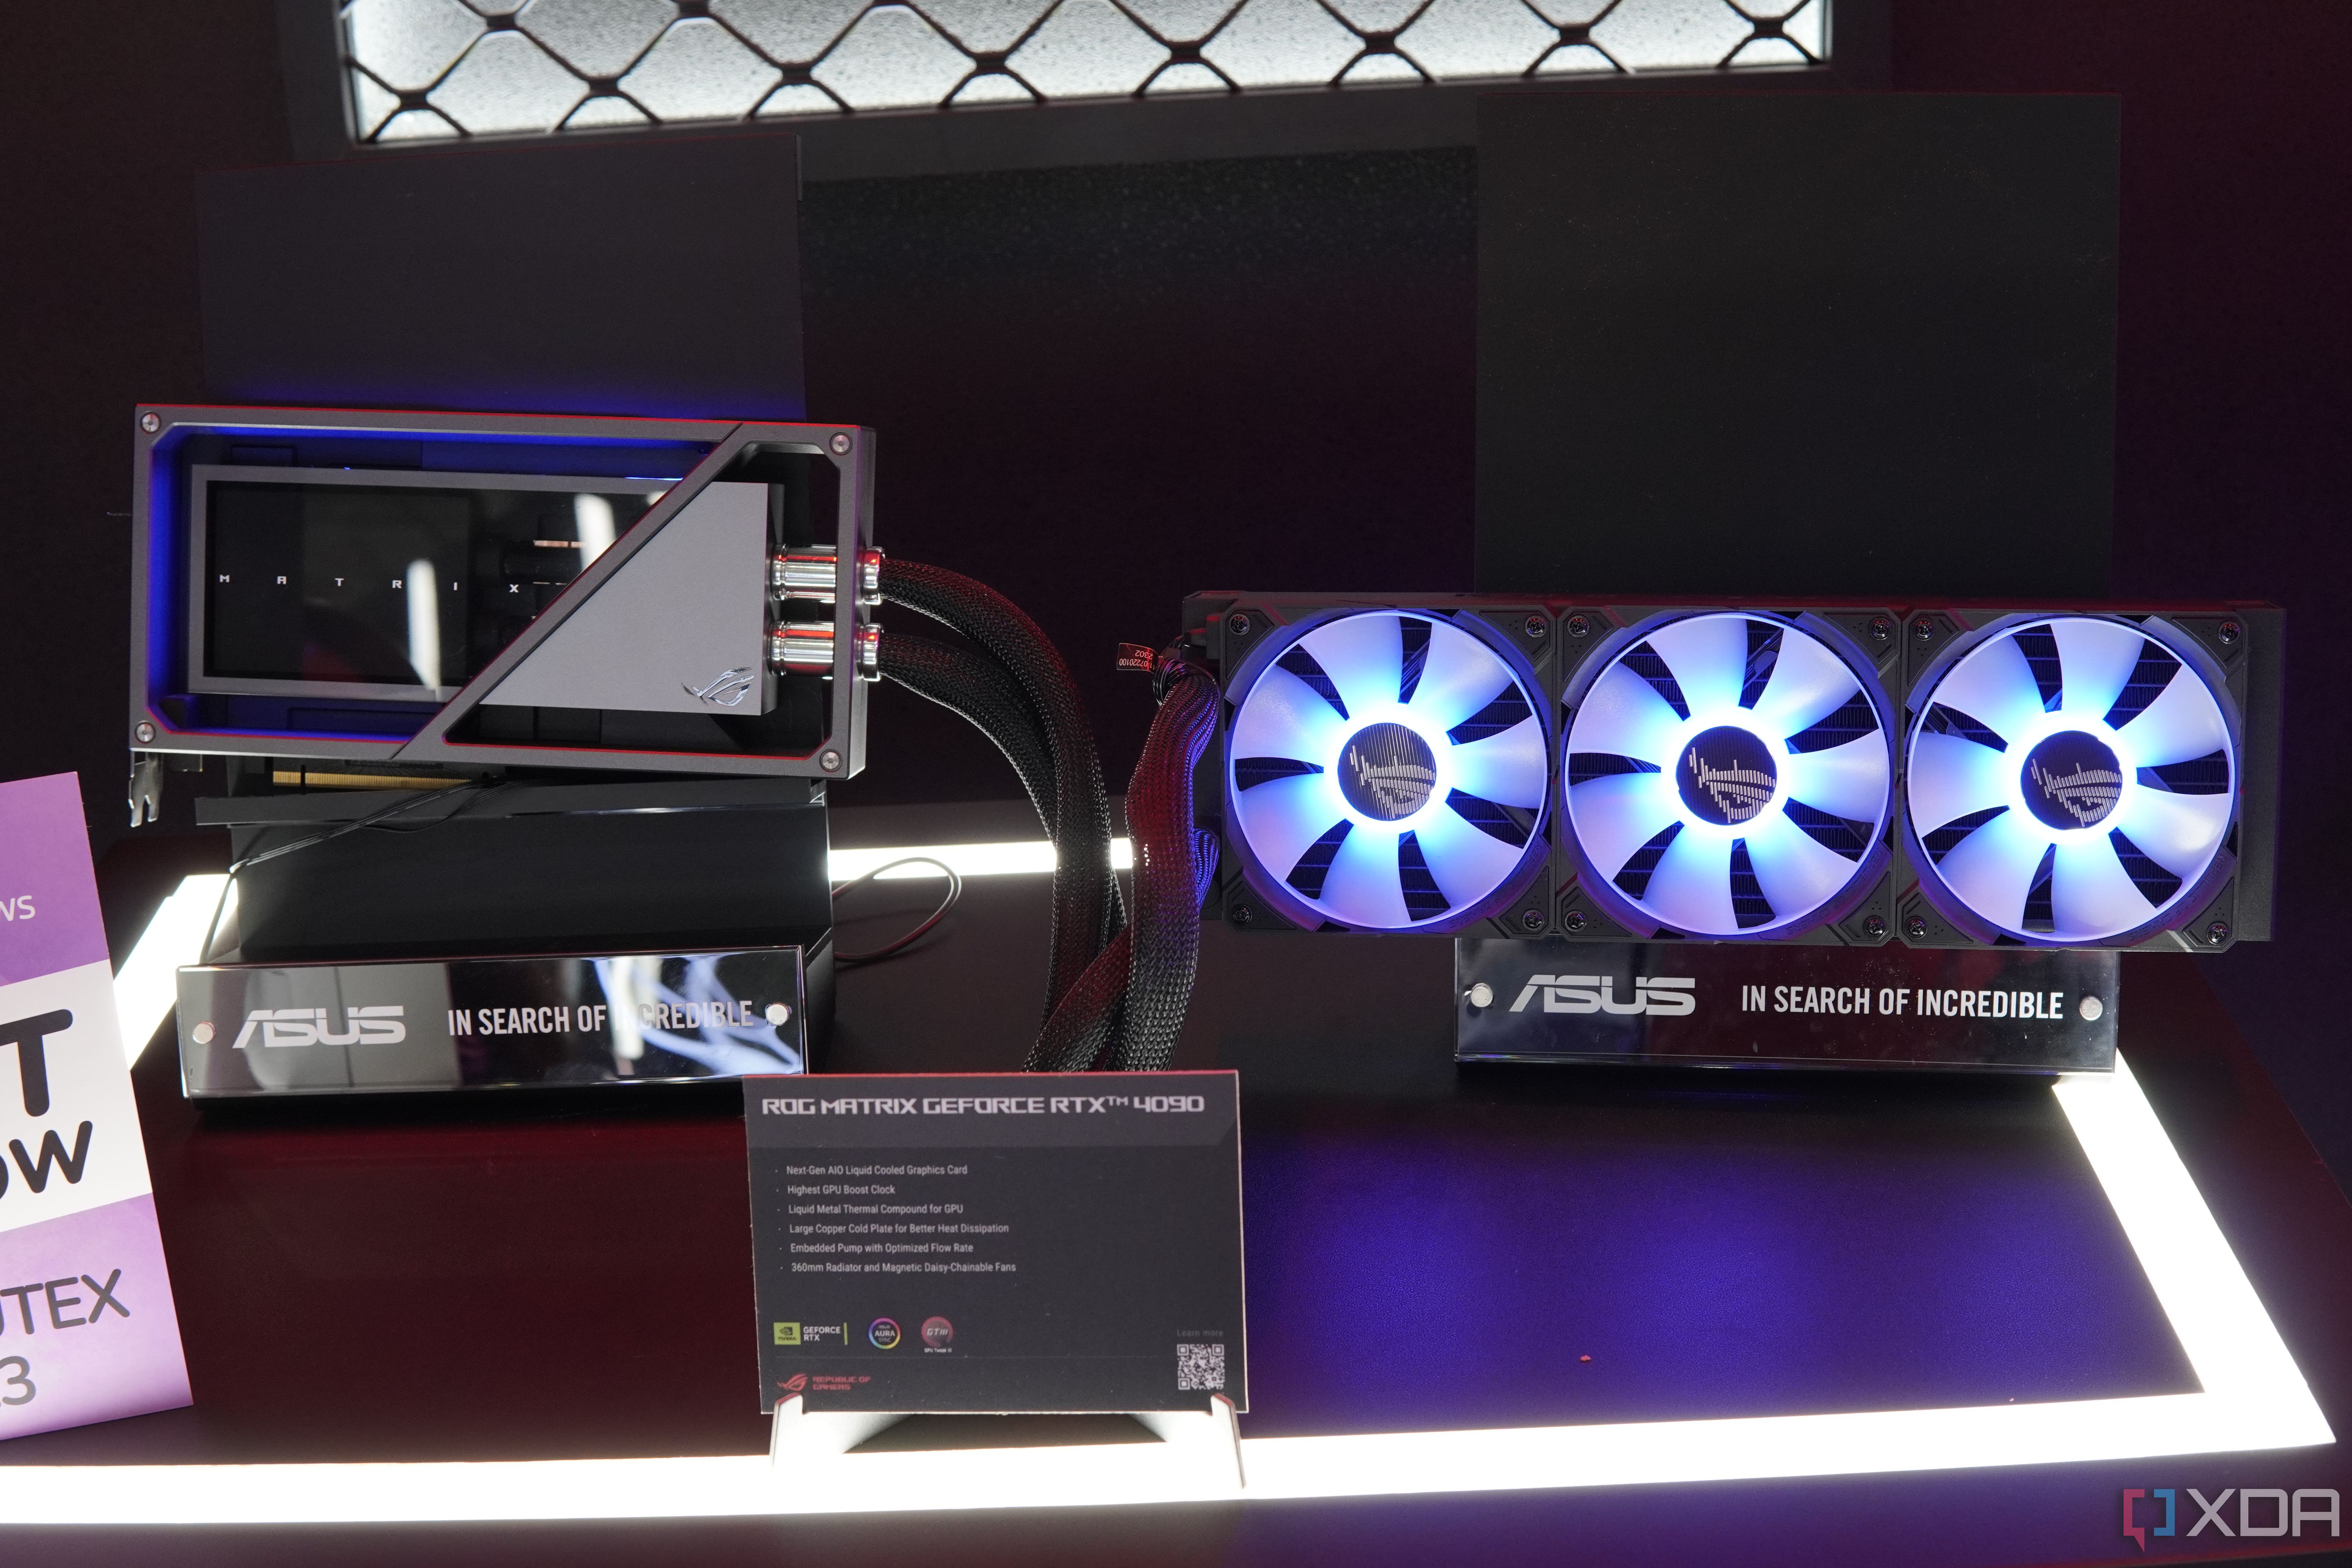 Front view of the Asus ROG Matrix GeForce RTX 4090 and the cooling radiator